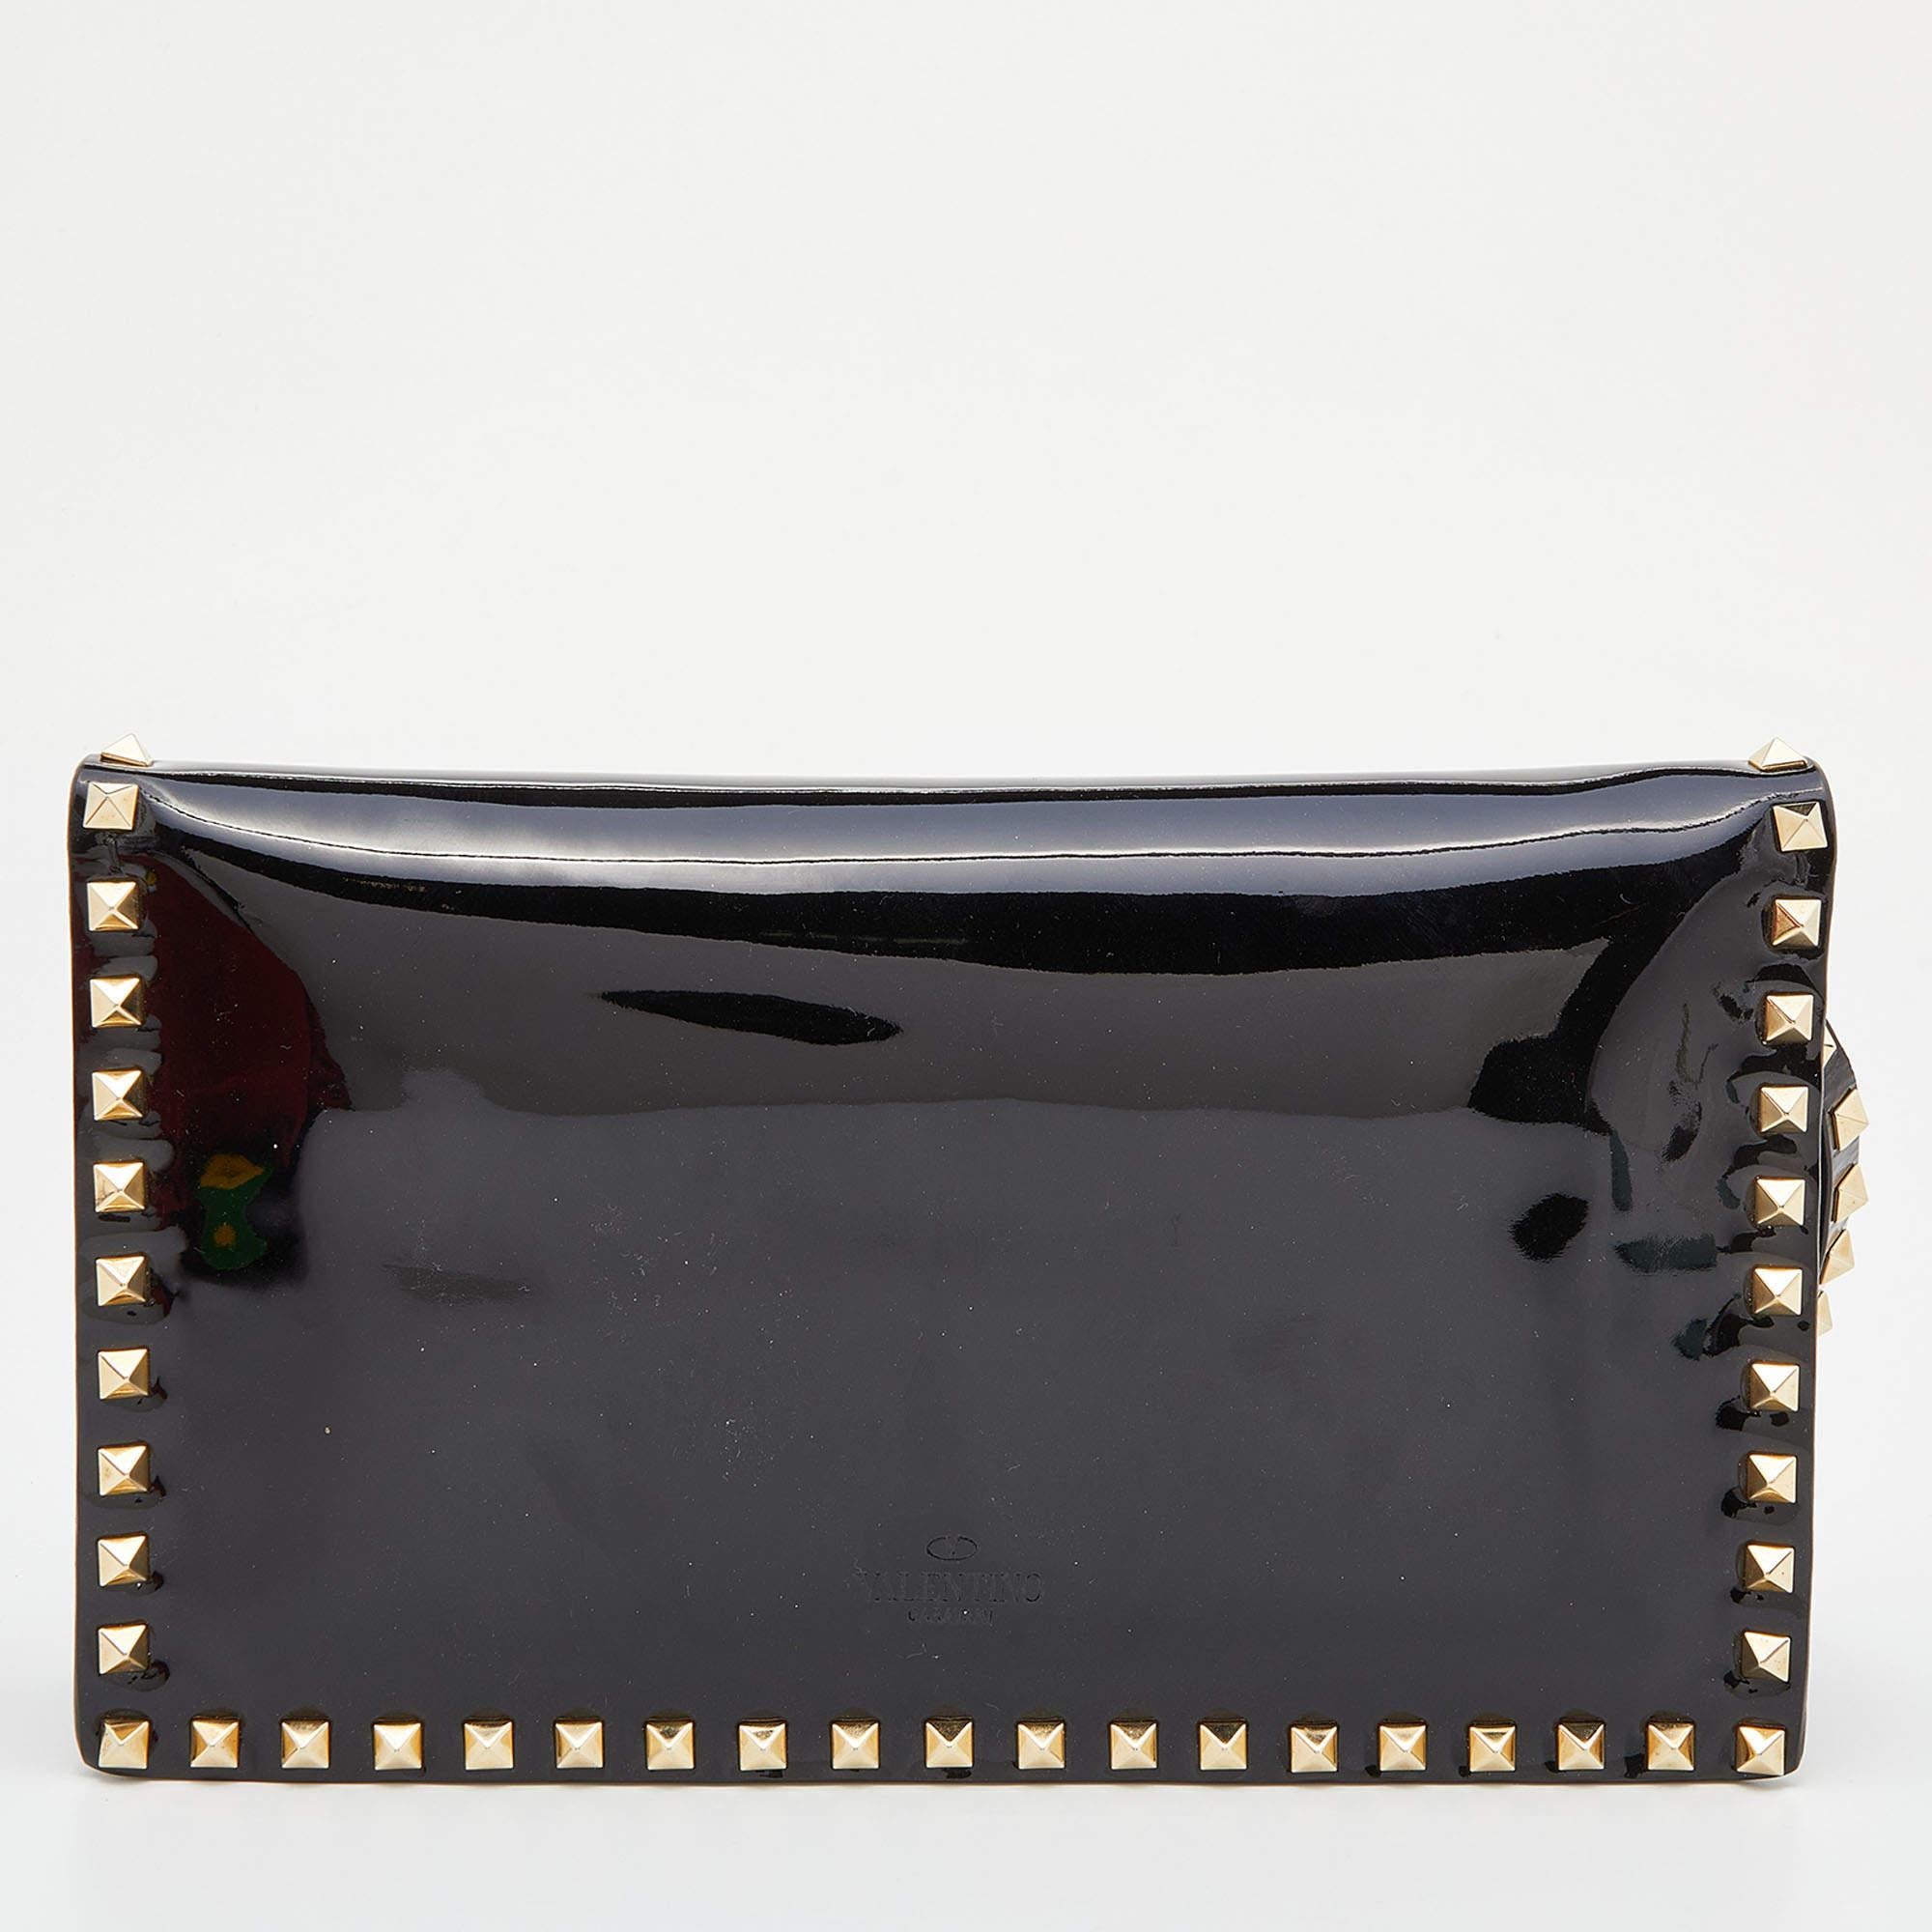 This Valentino clutch is a statement piece to add to your closet. Designed to deliver effortless style, it is crafted in Italy from quality patent leather. It comes in a lovely shade of black and is accented with the brand's signature Rockstuds. It